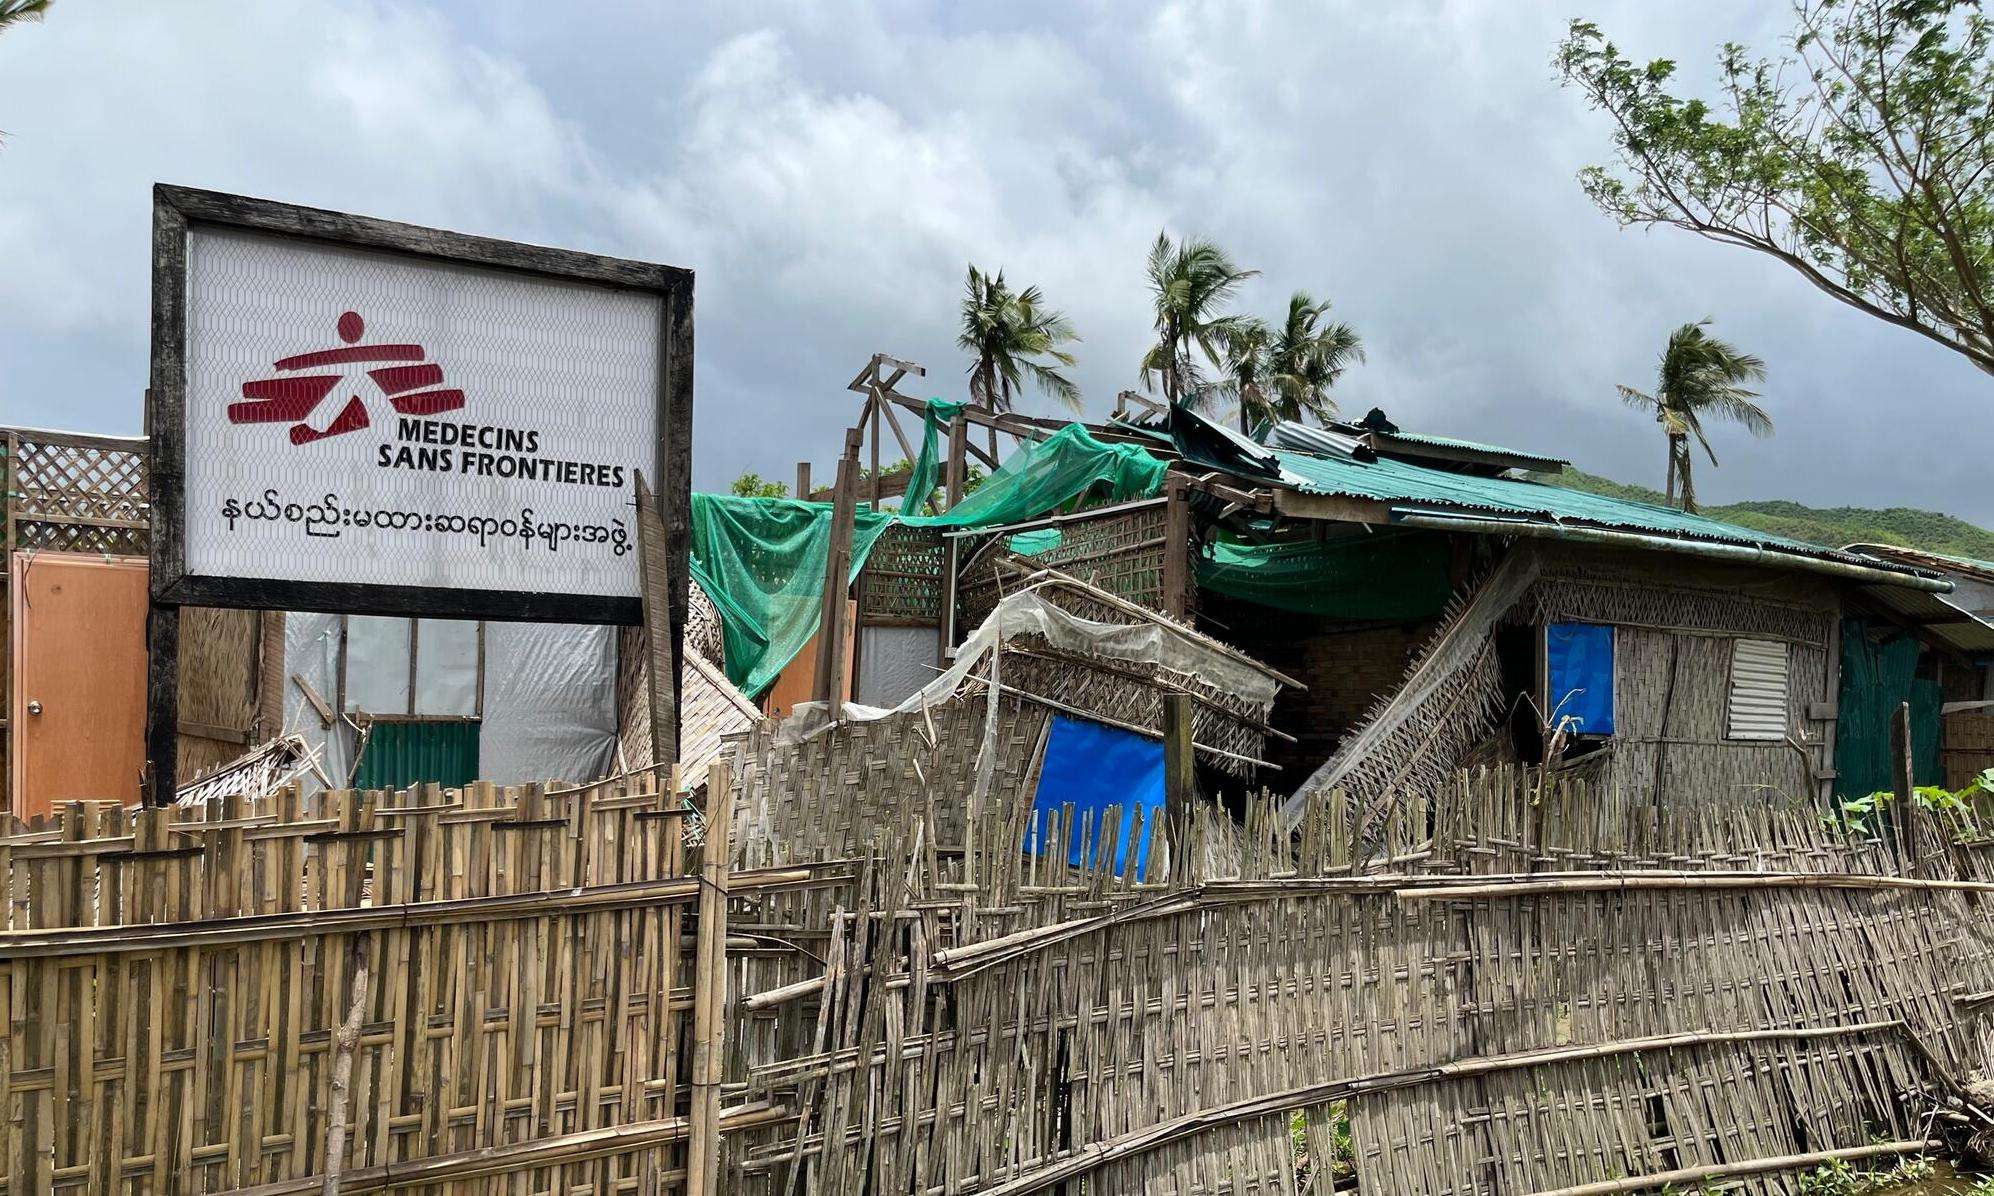 MSF clinic at Kein Nyin Pyin camp Pauktaw, Rakhine State, Myanmar on 22nd June, over one month after Cyclone Mocha